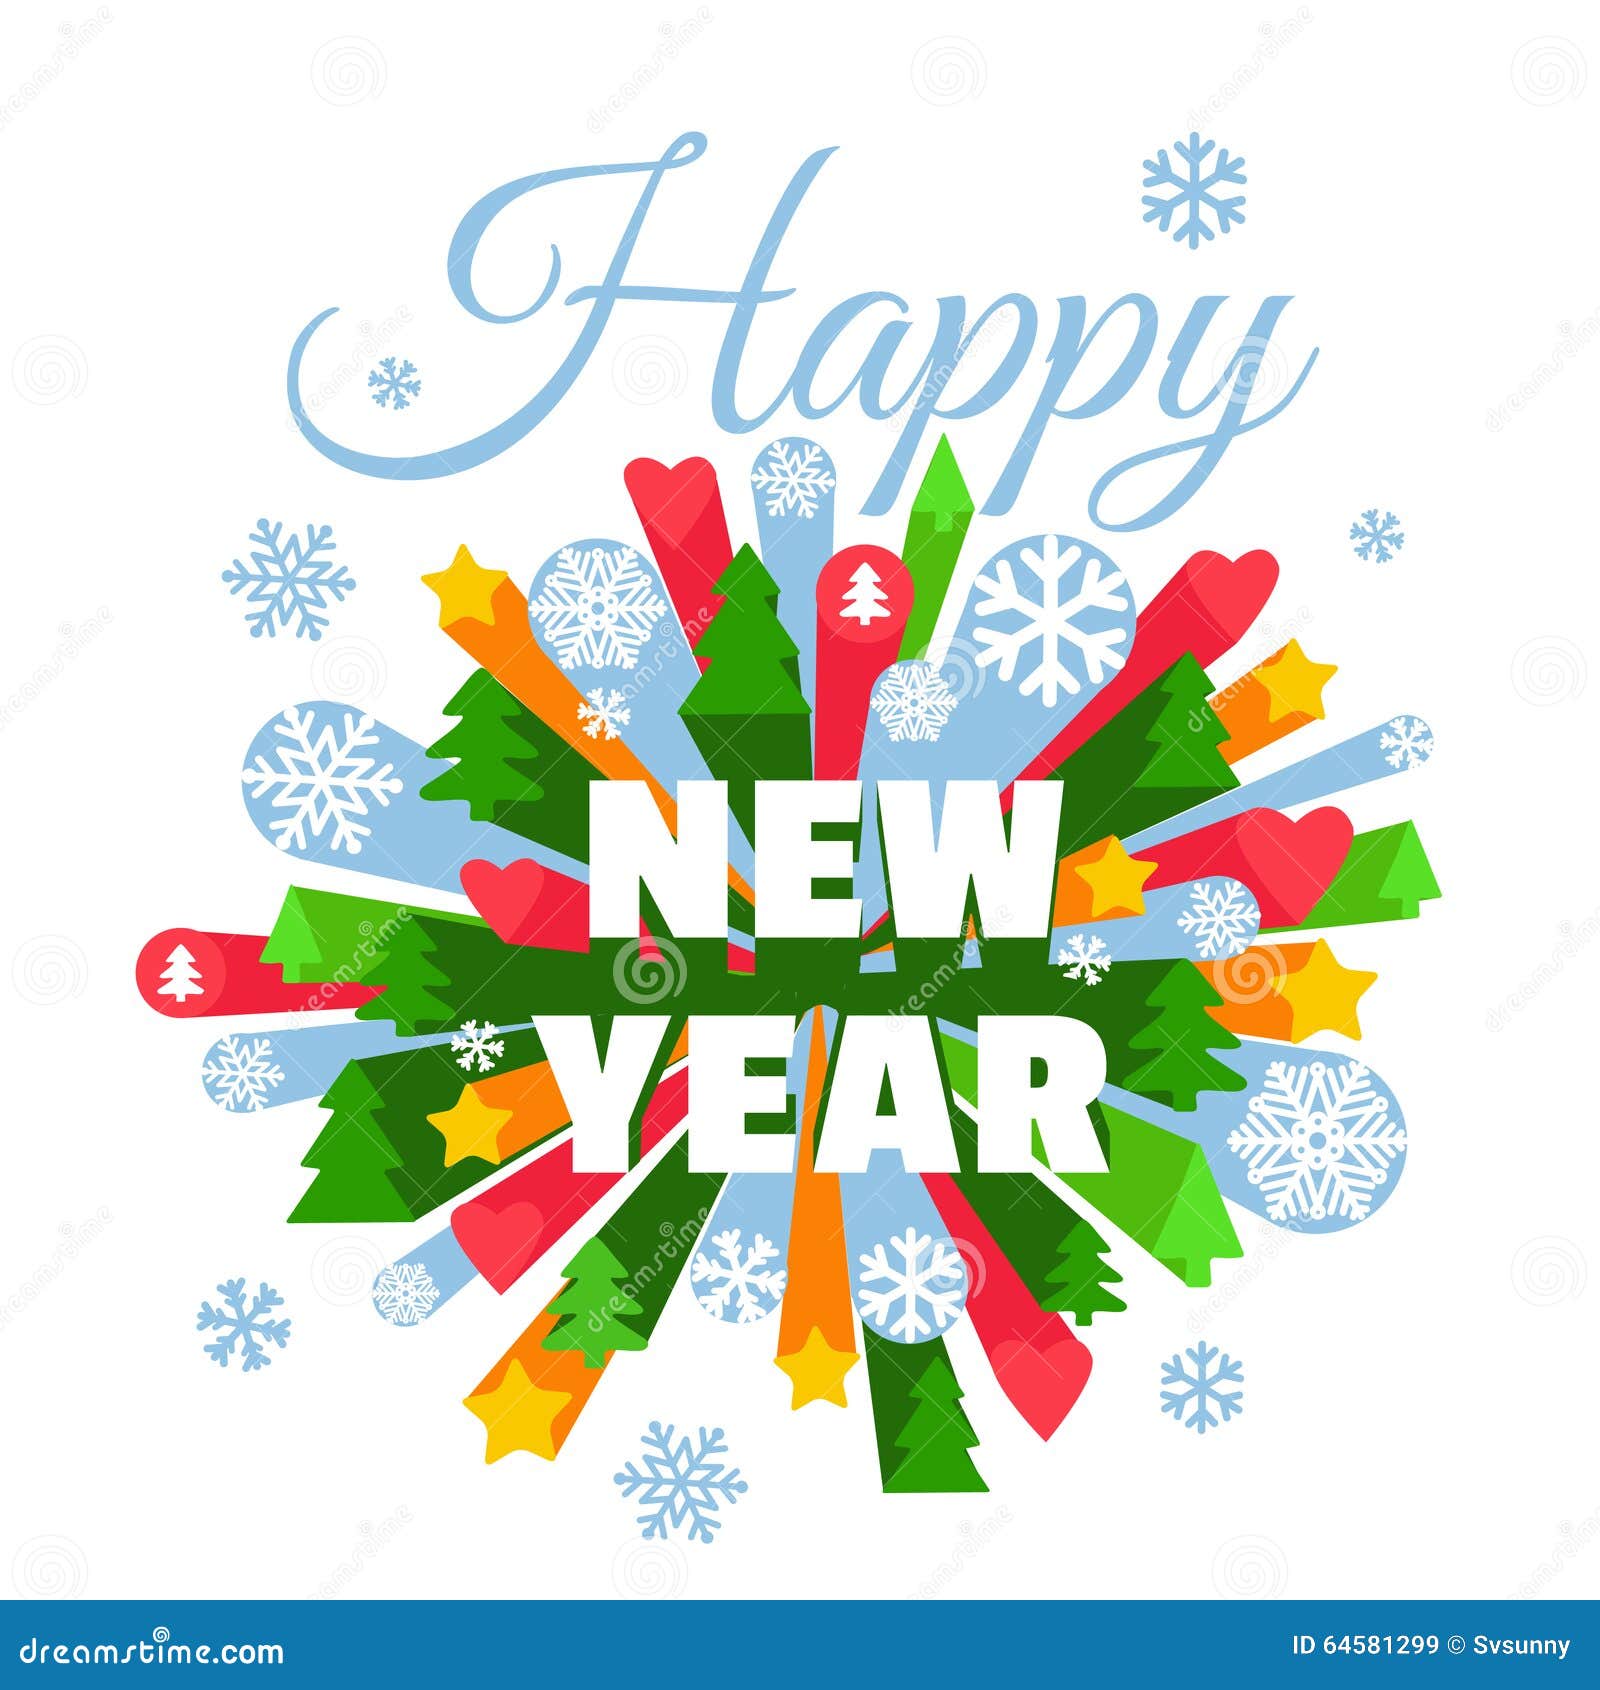 Happy New Year Greeting Card Stock Vector - Illustration of decoration ...